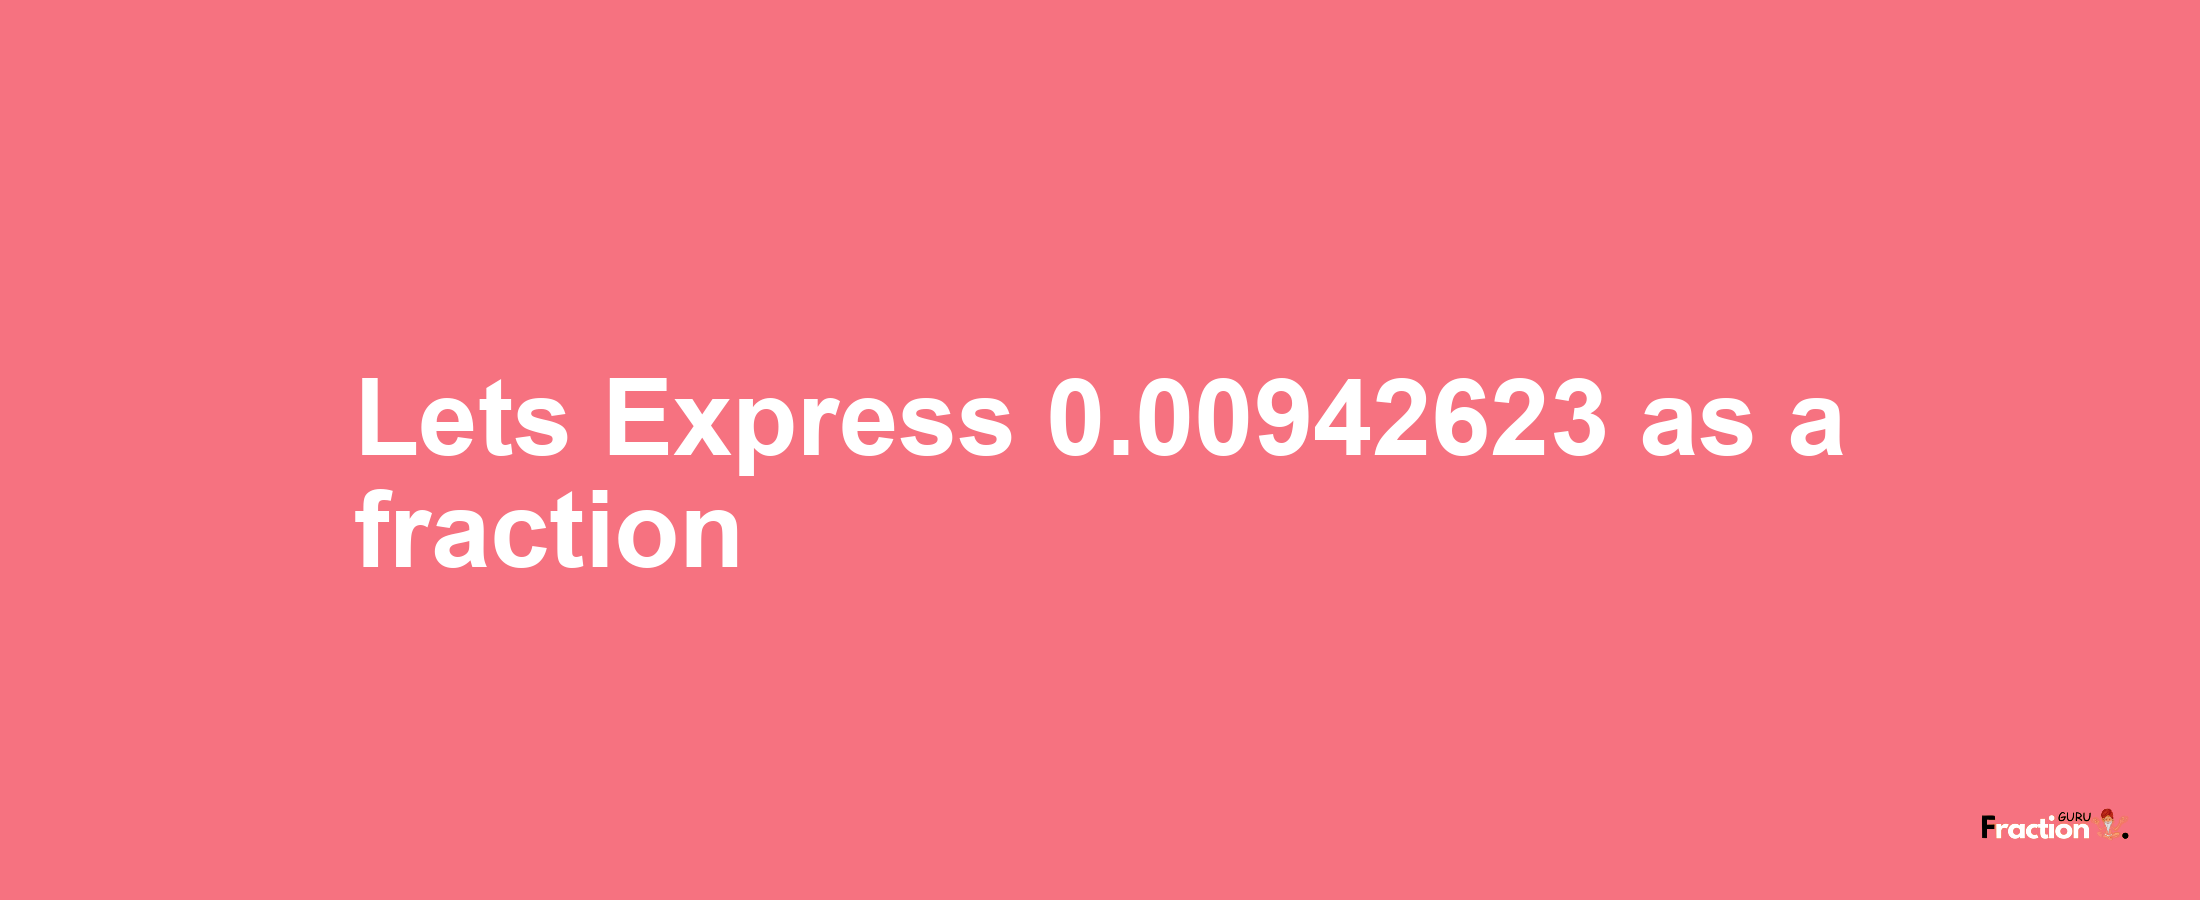 Lets Express 0.00942623 as afraction